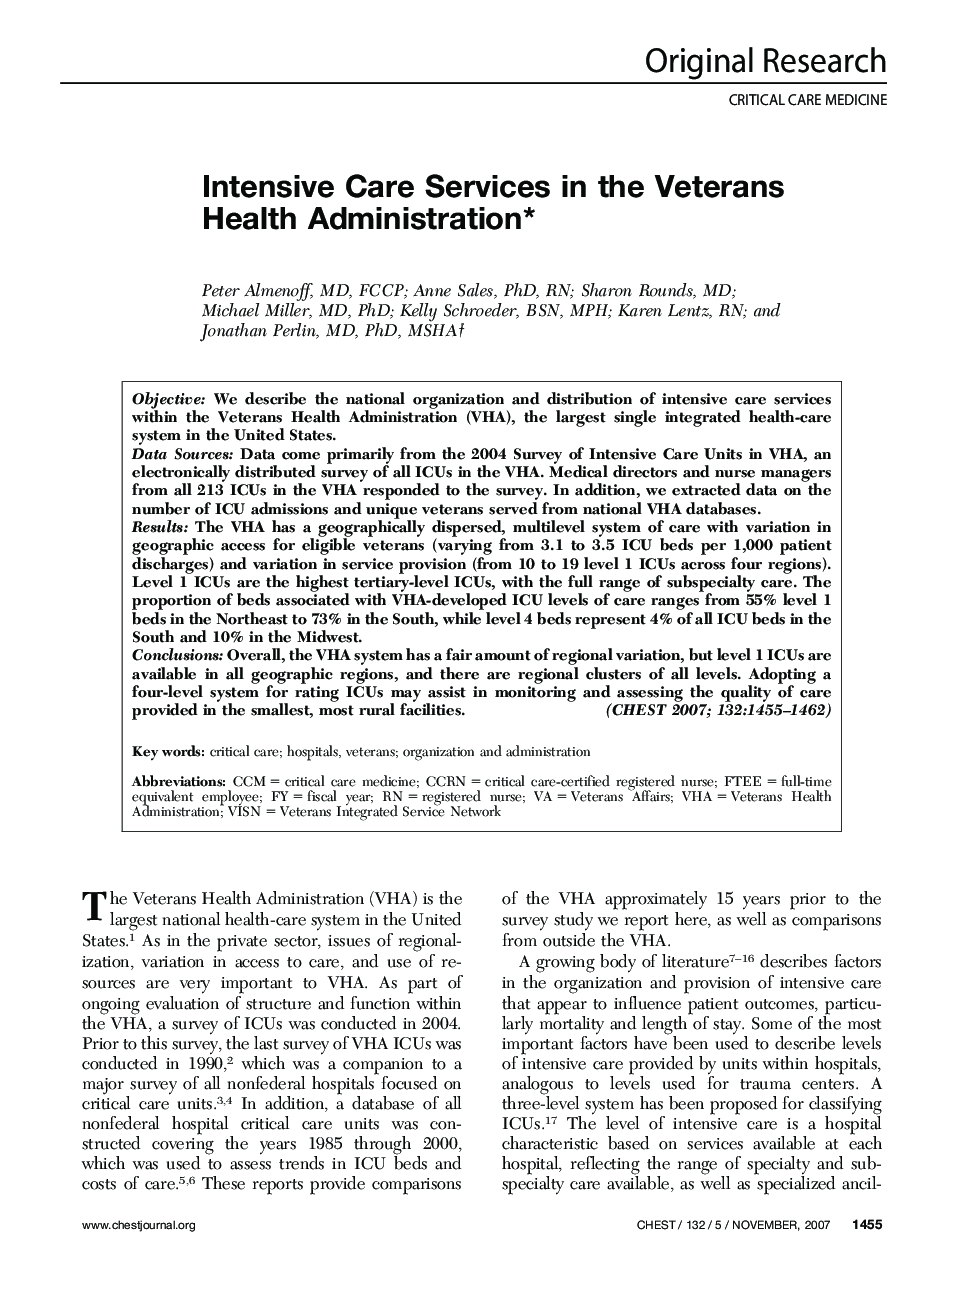 Intensive Care Services in the Veterans Health Administration 